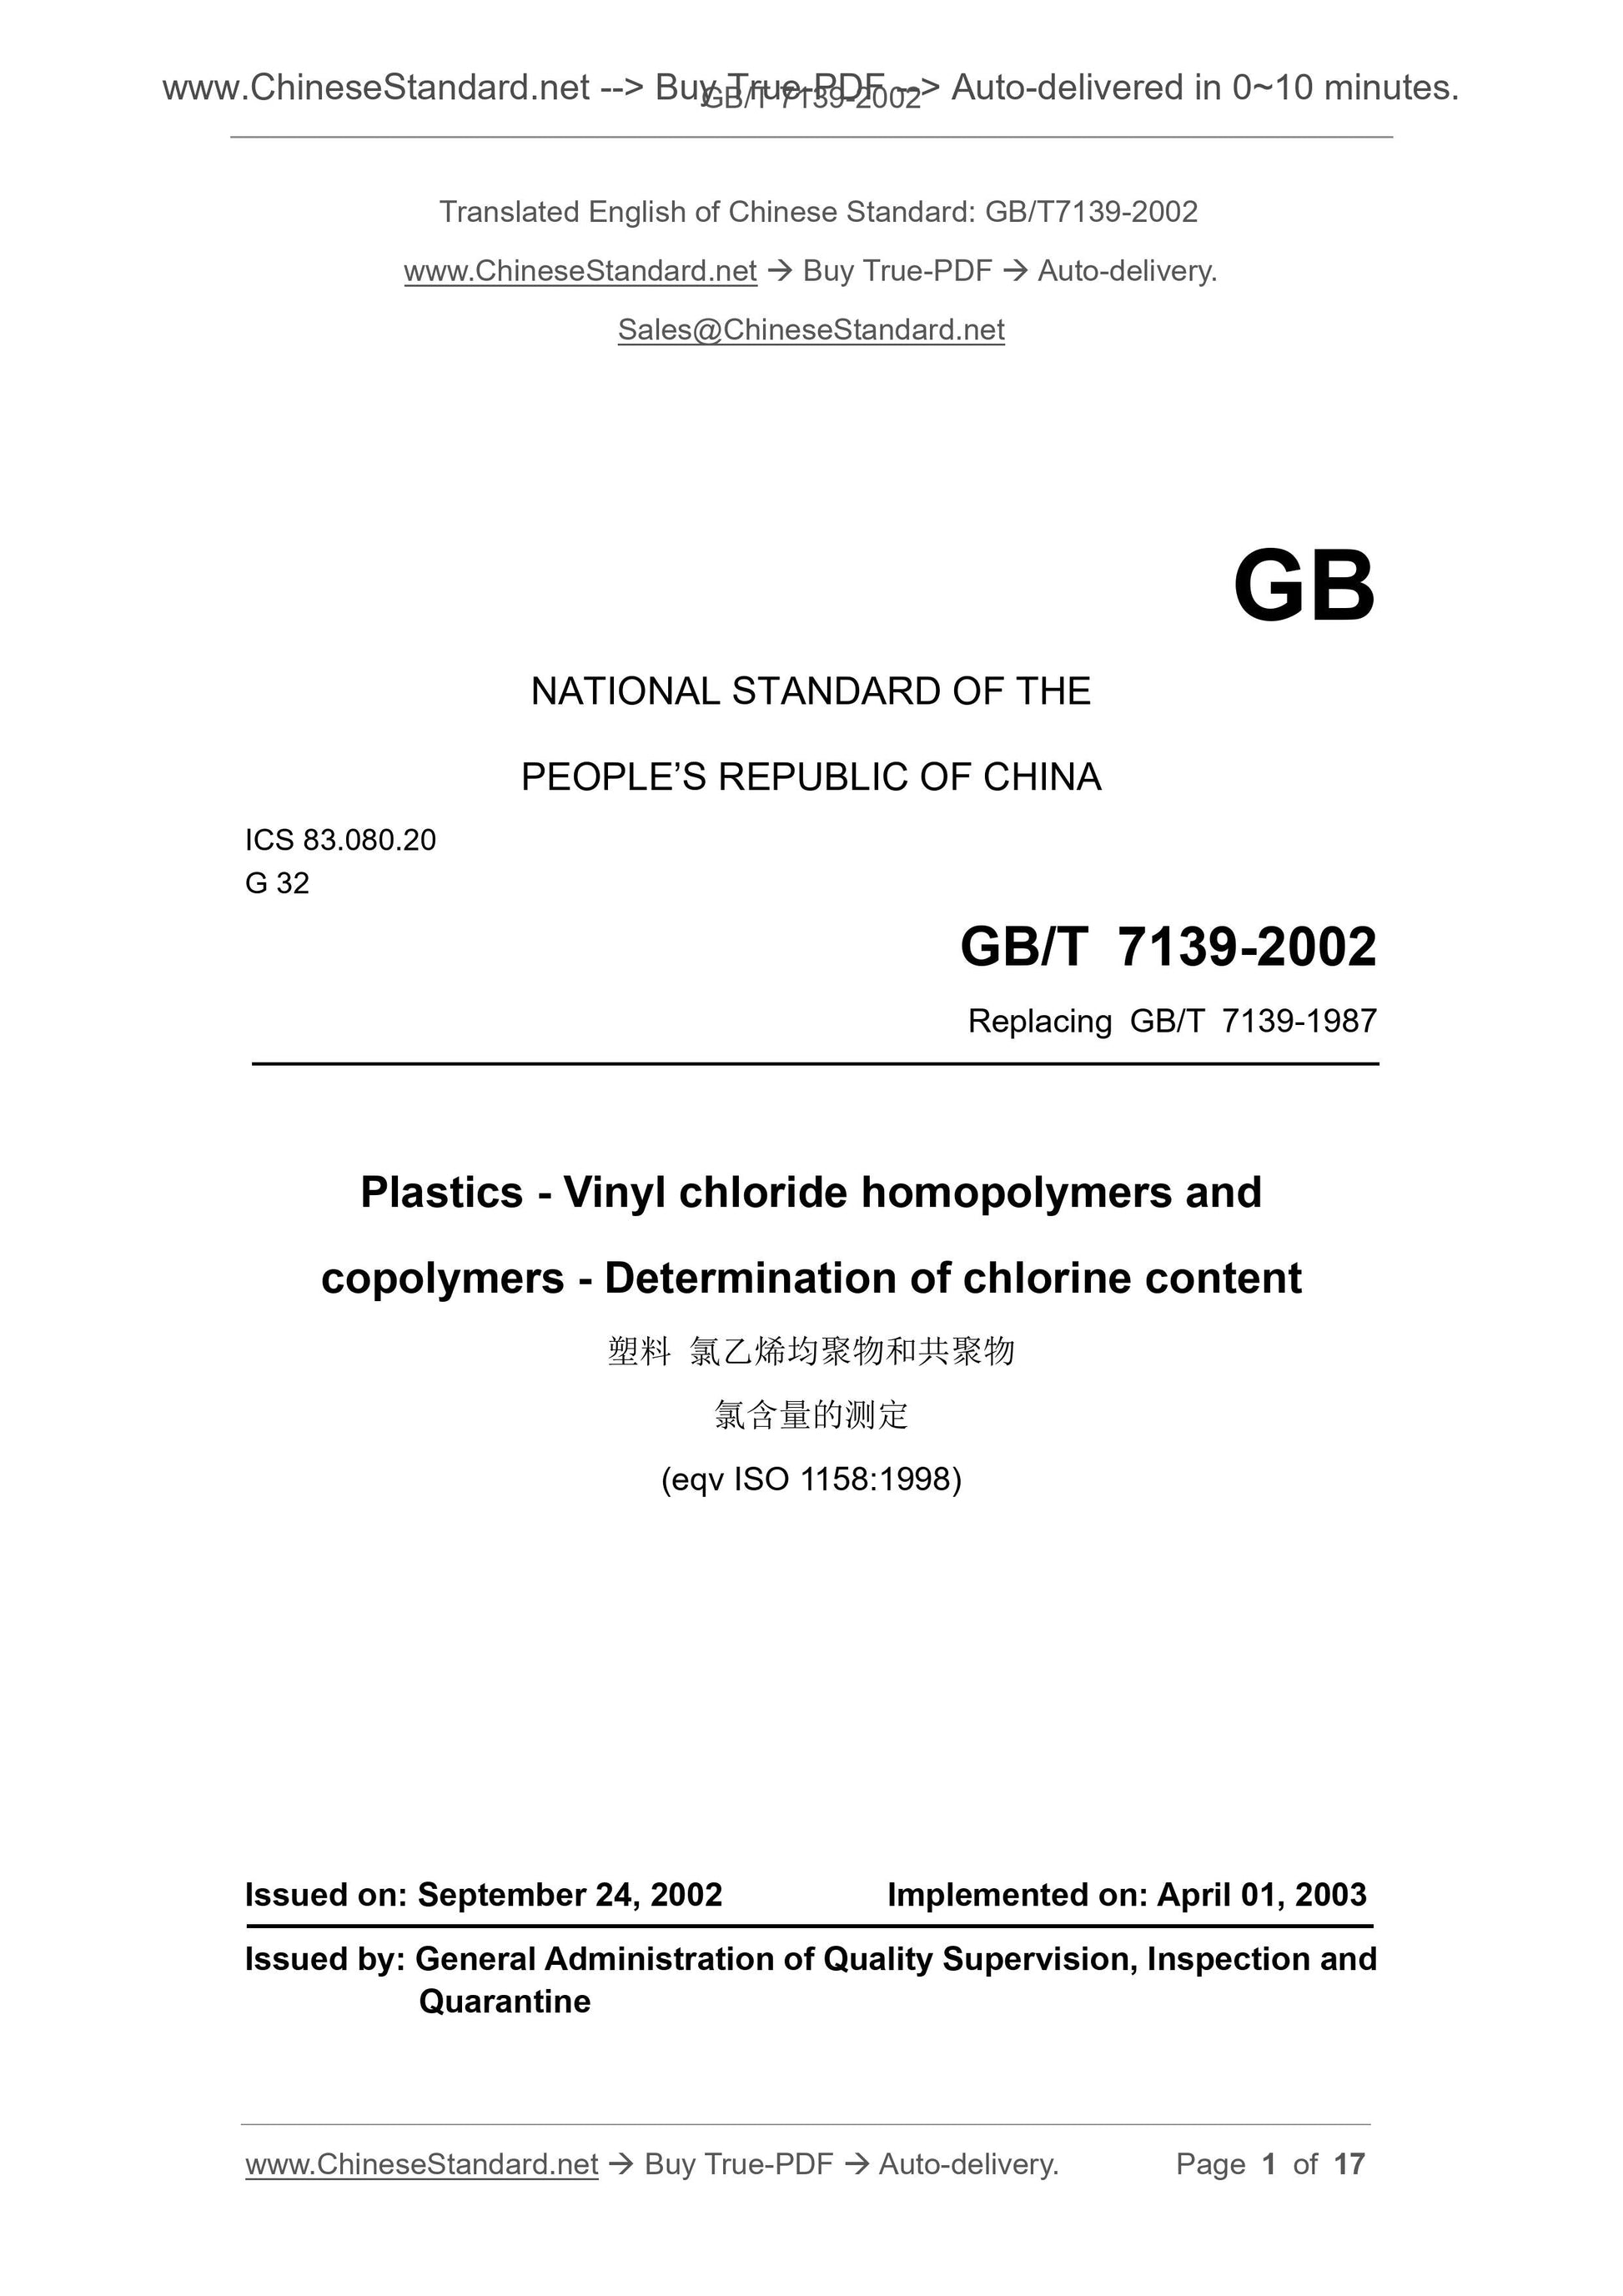 GB/T 7139-2002 Page 1